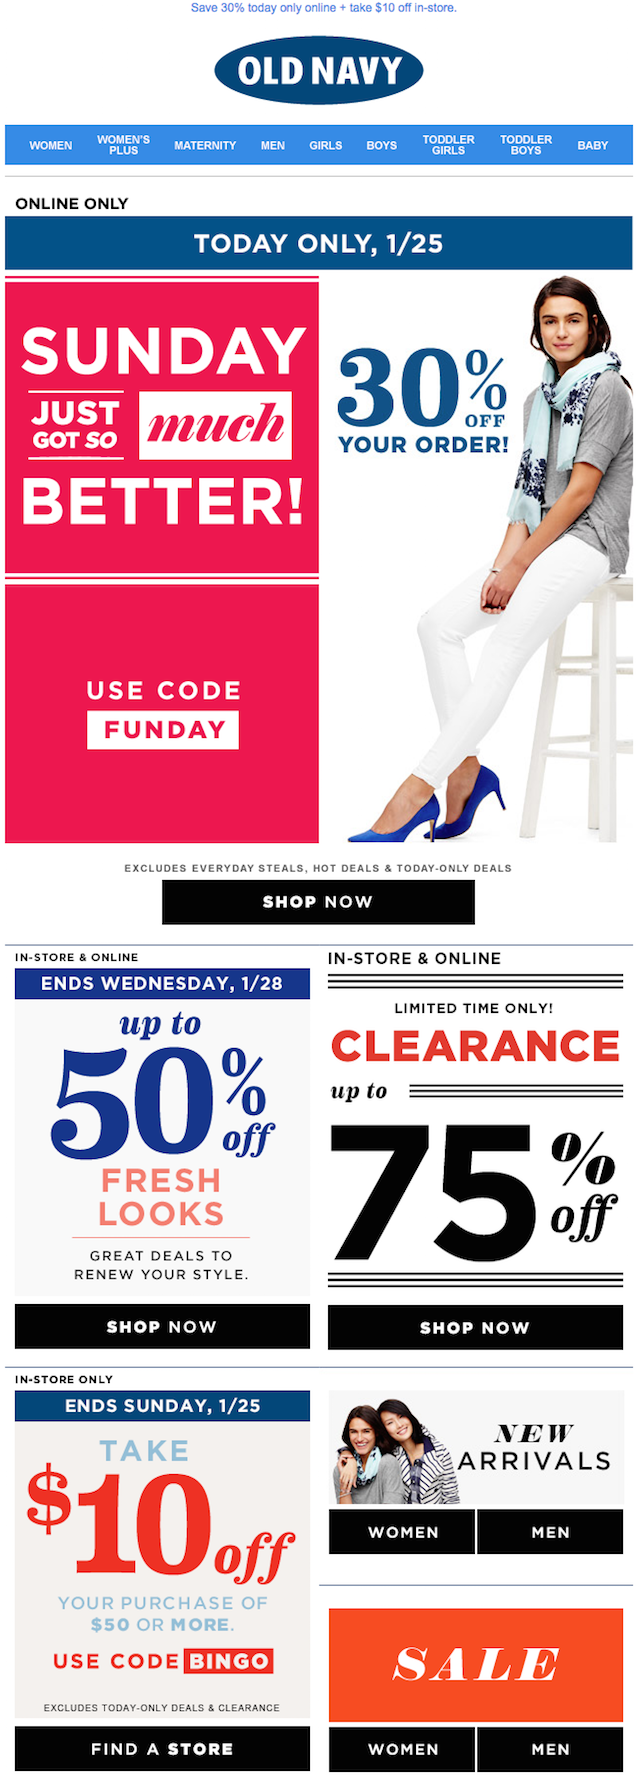 old navy coupons in store